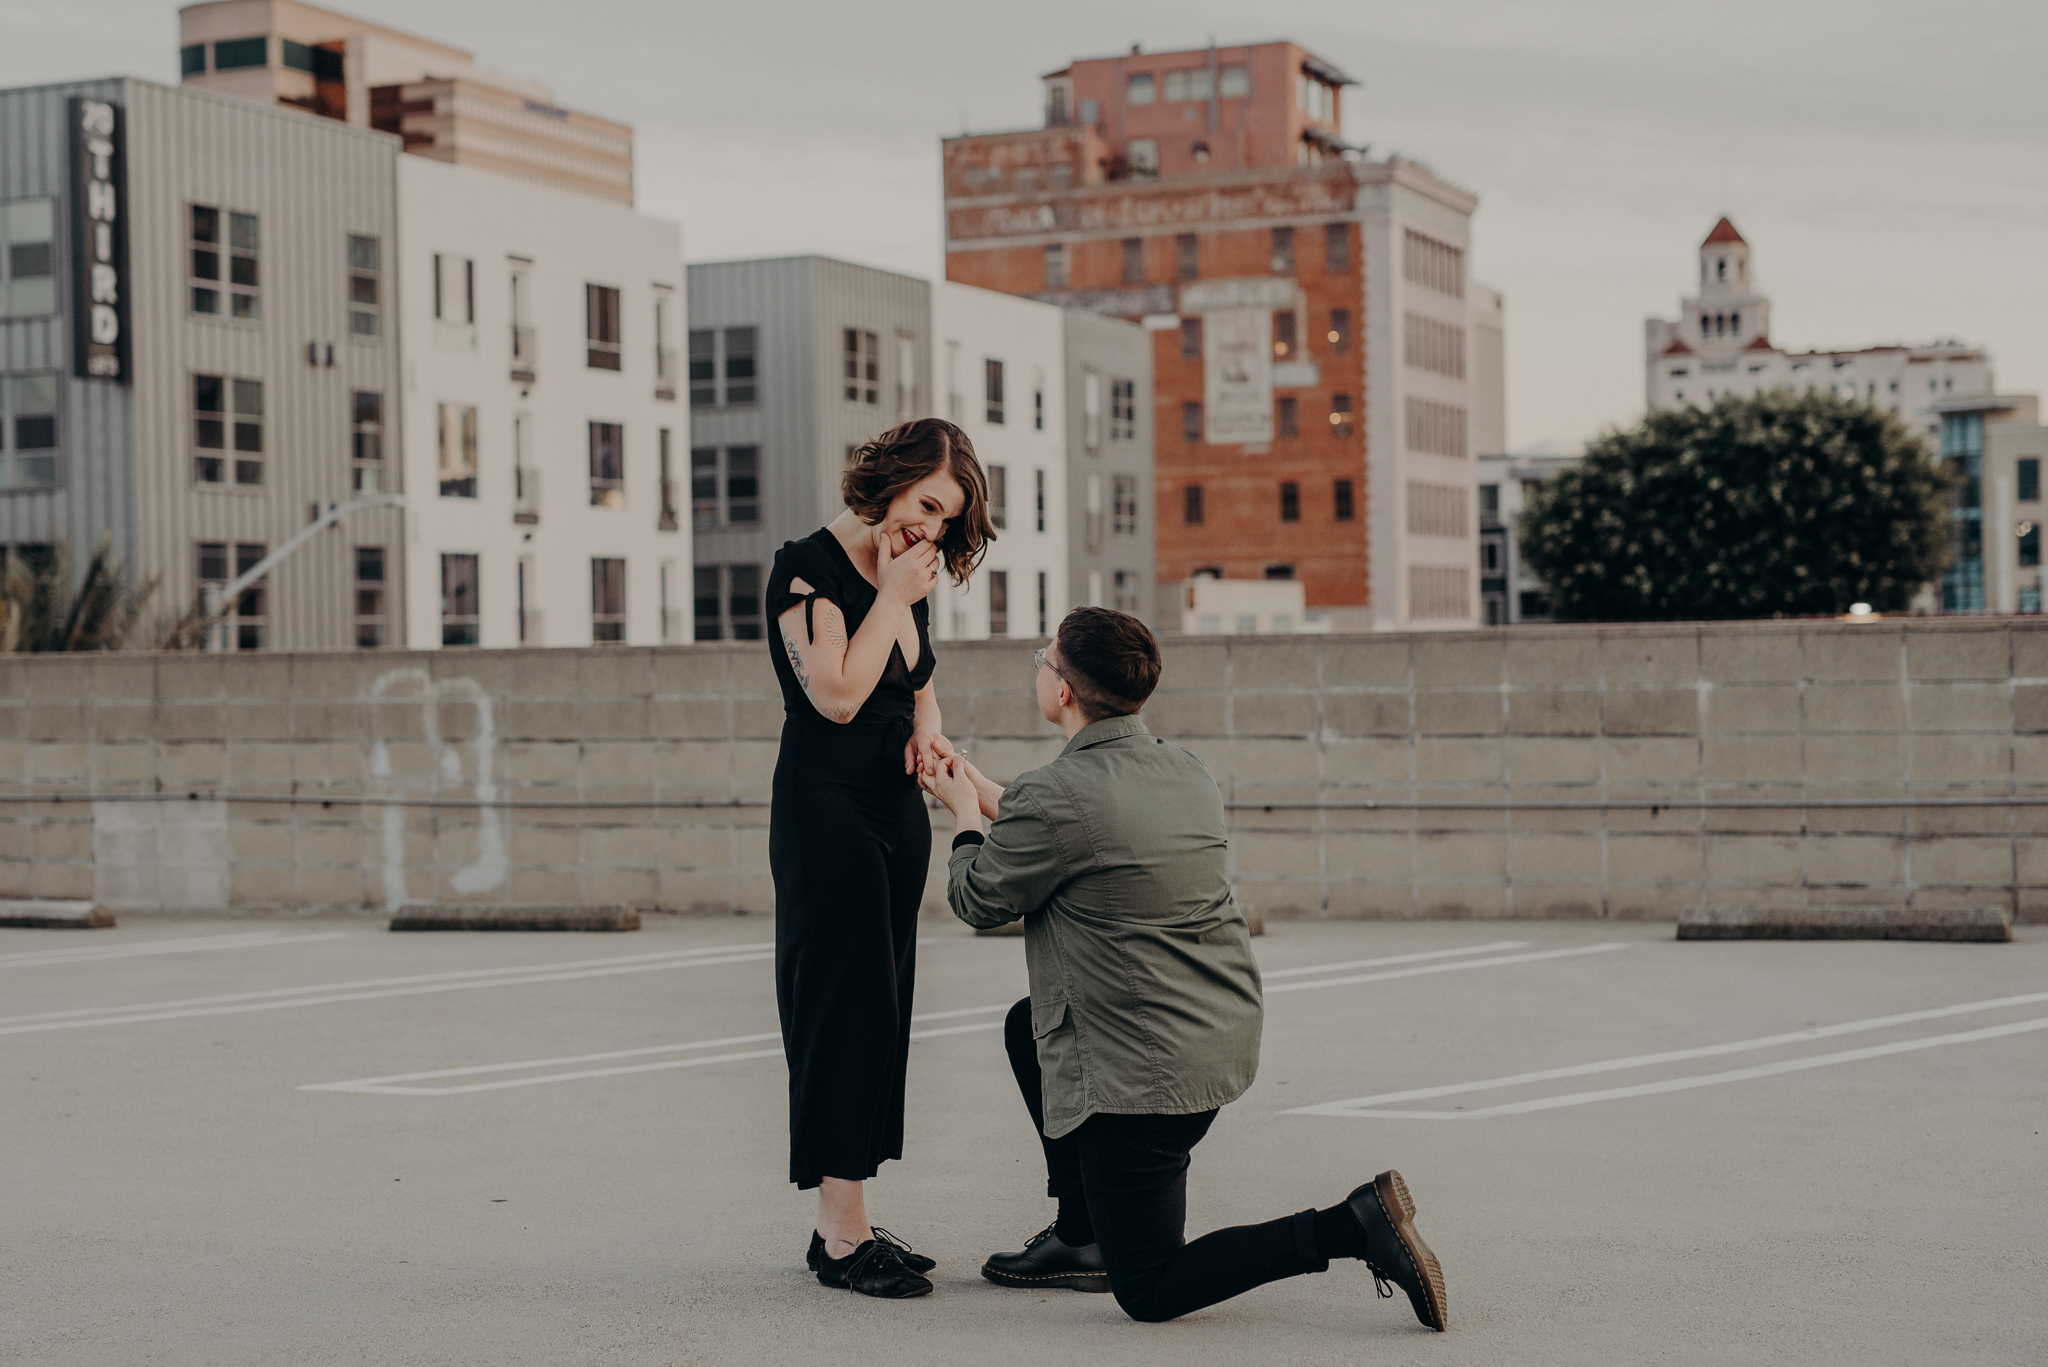 surprise rooftop proposal - lgbtq wedding photographer in Los Angeles - lesbian engagement session - dtlb wedding